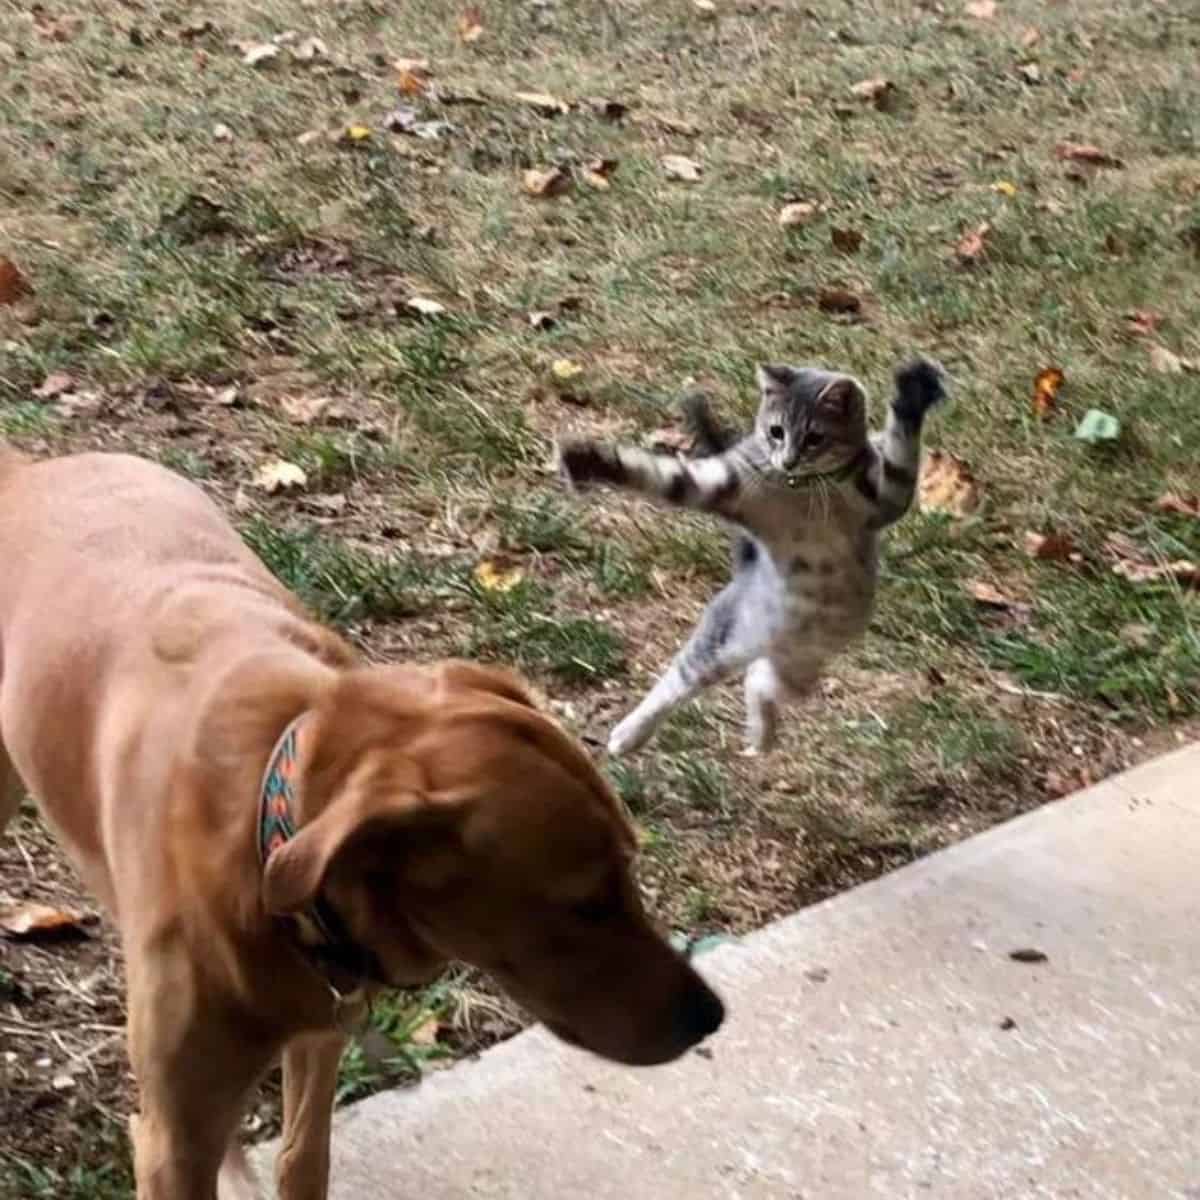 cat jumping on dog